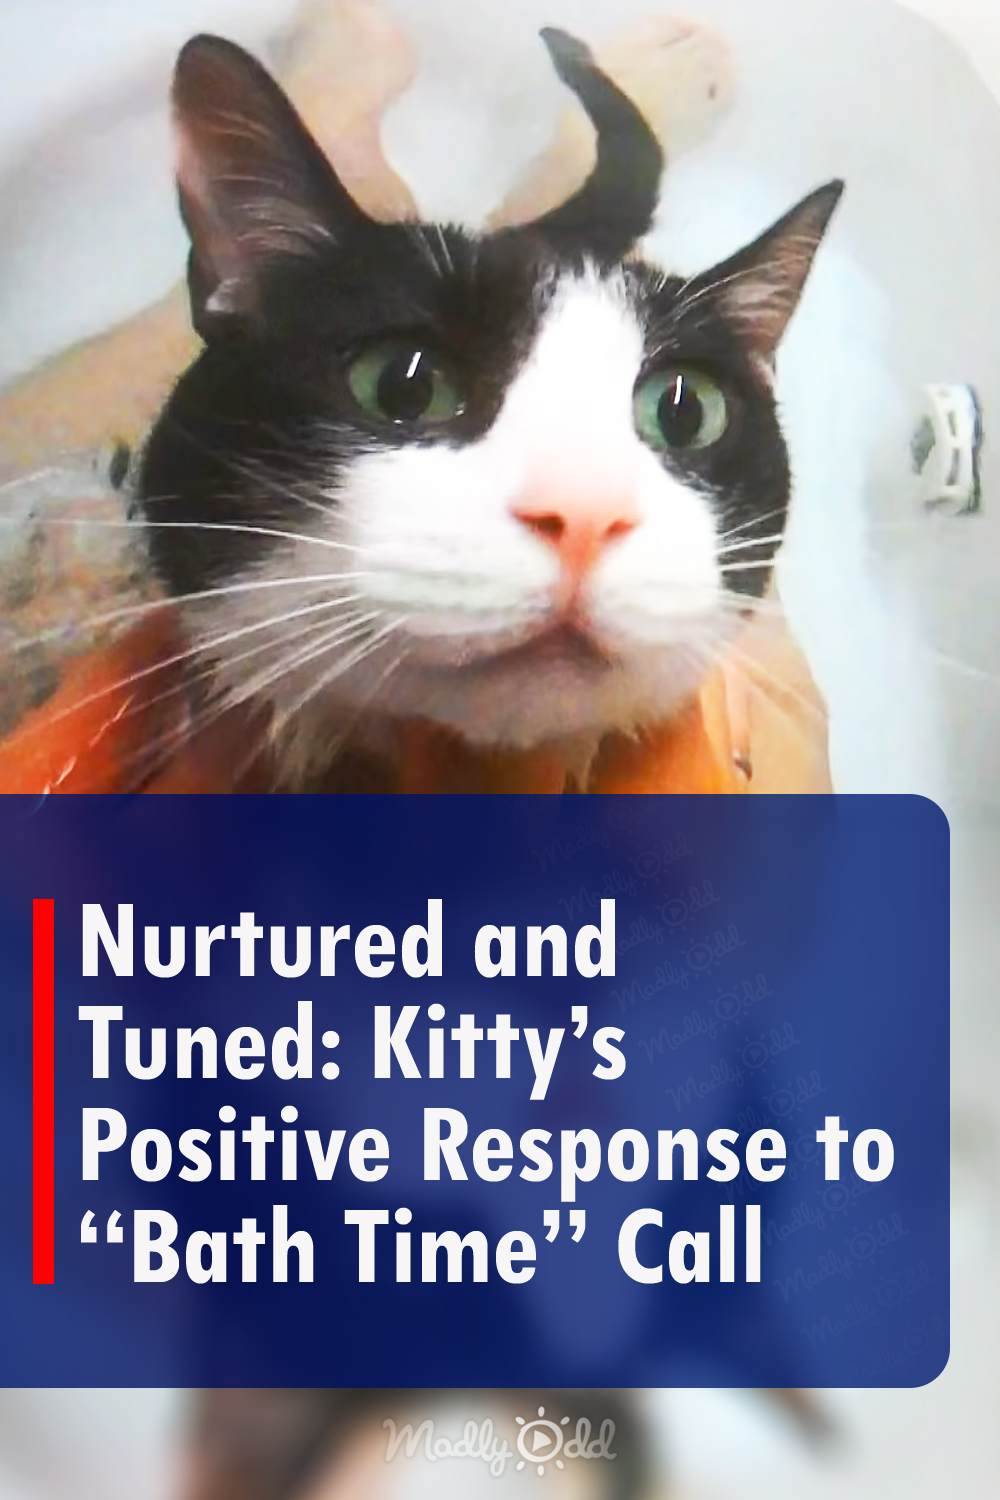 Nurtured and Tuned: Kitty’s Positive Response to “Bath Time” Call